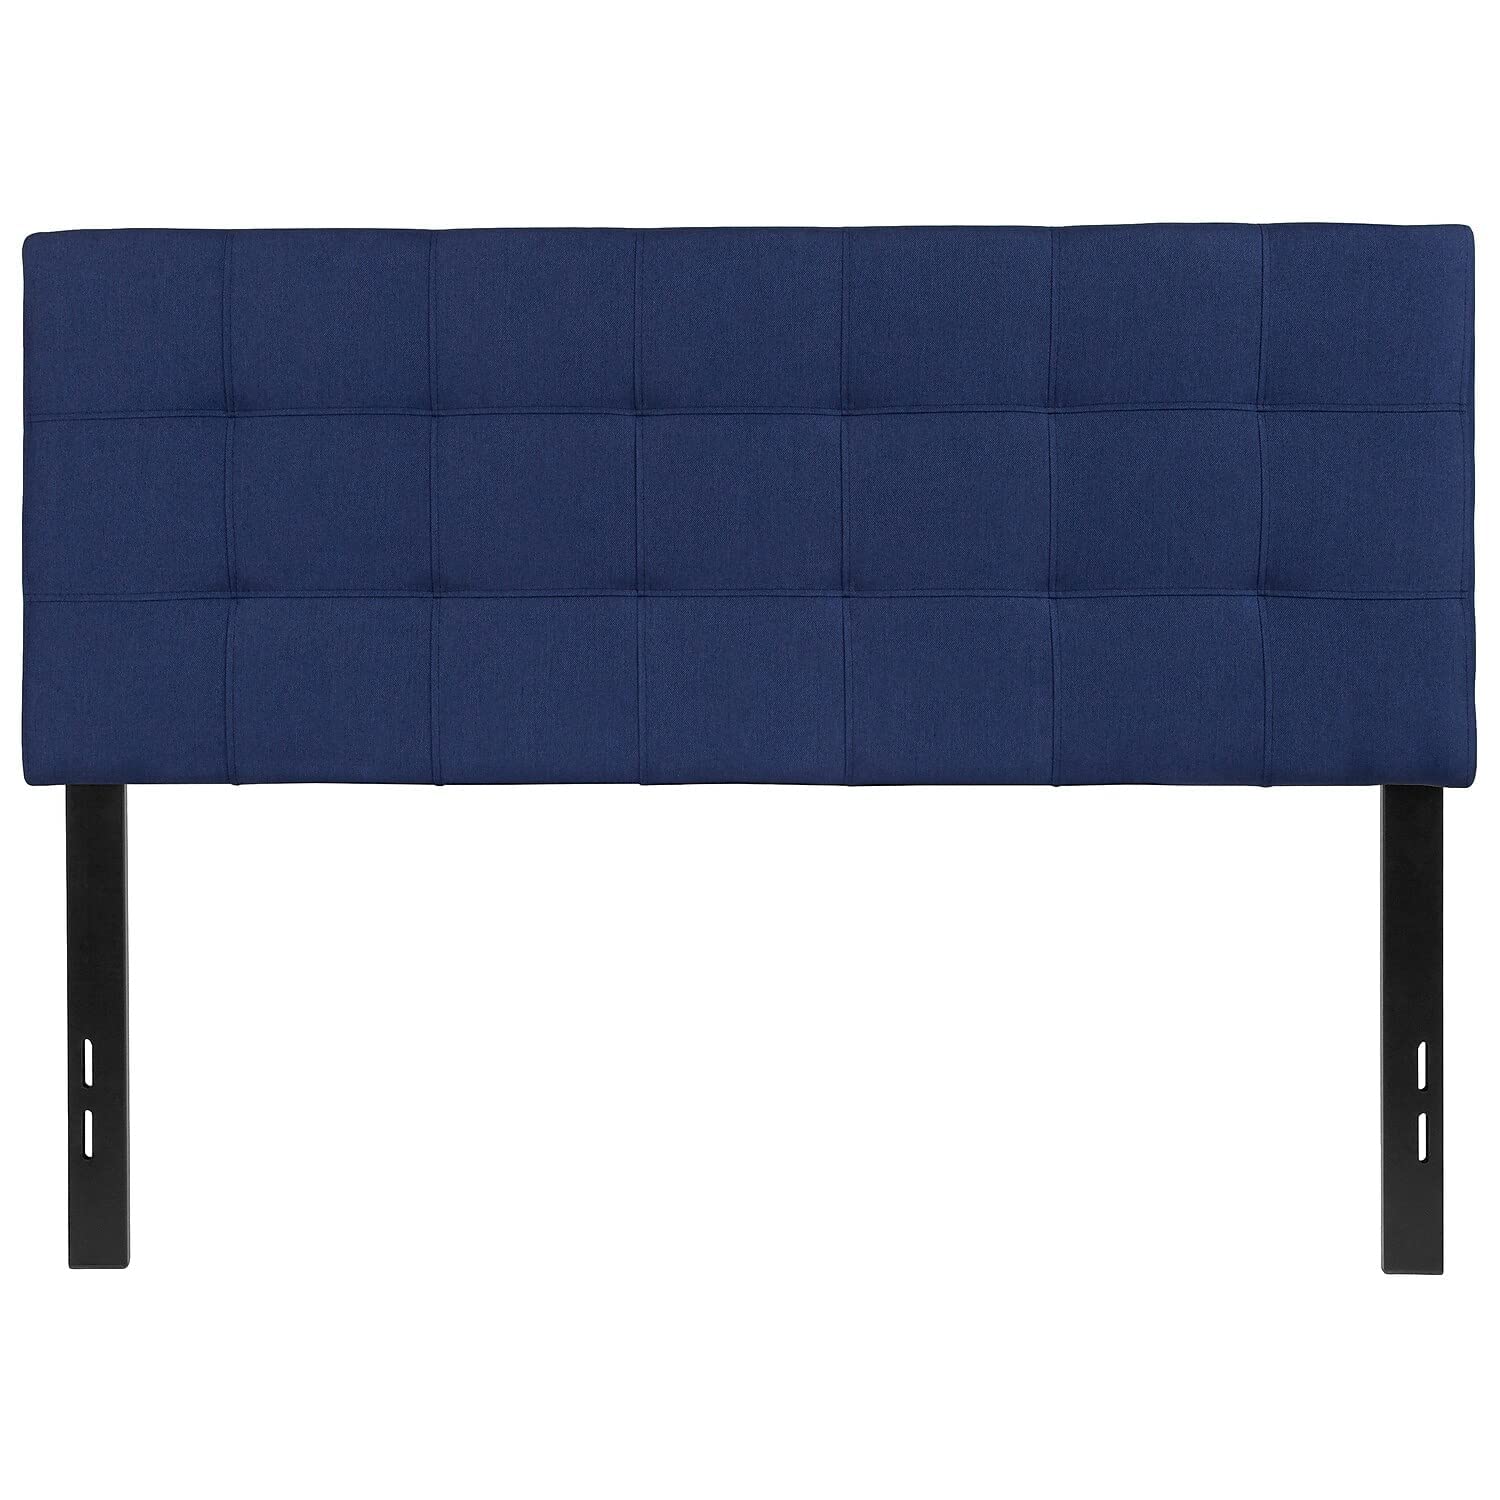 Book Cover Flash Furniture Bedford Tufted Upholstered Full Size Headboard in Navy Fabric Full Navy